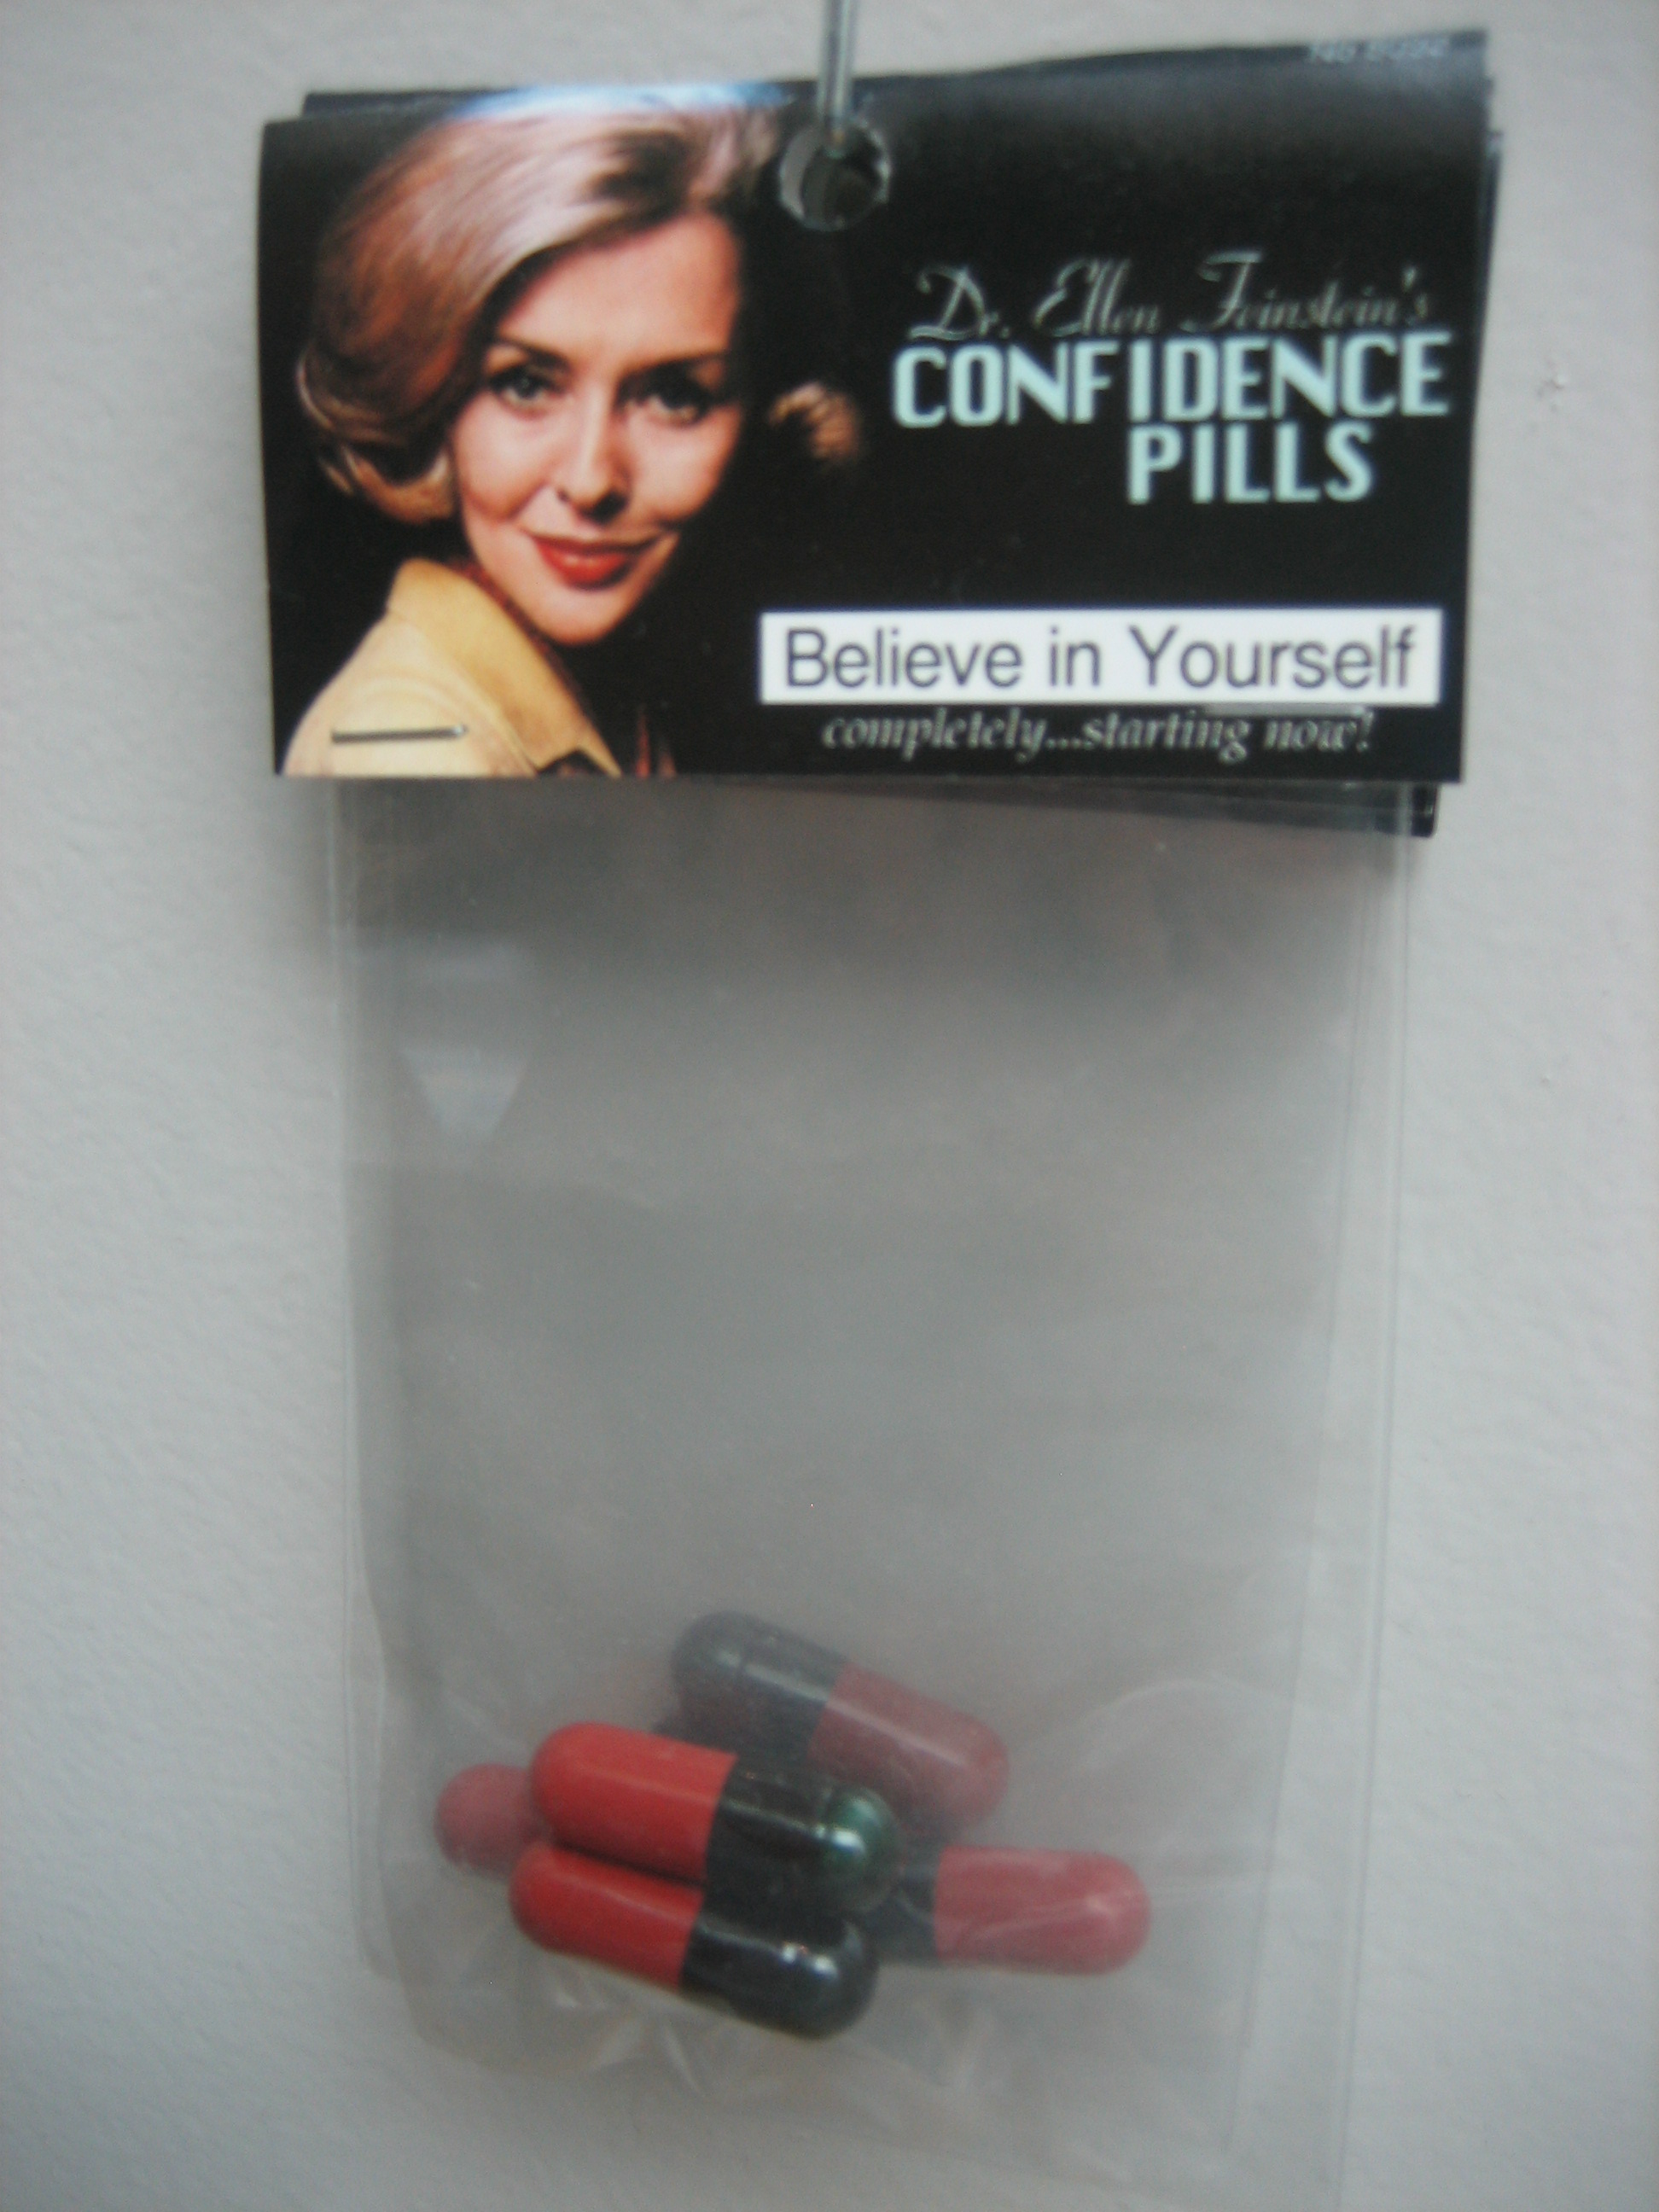 confidence pills, photo by hissingteakettle on Flickr